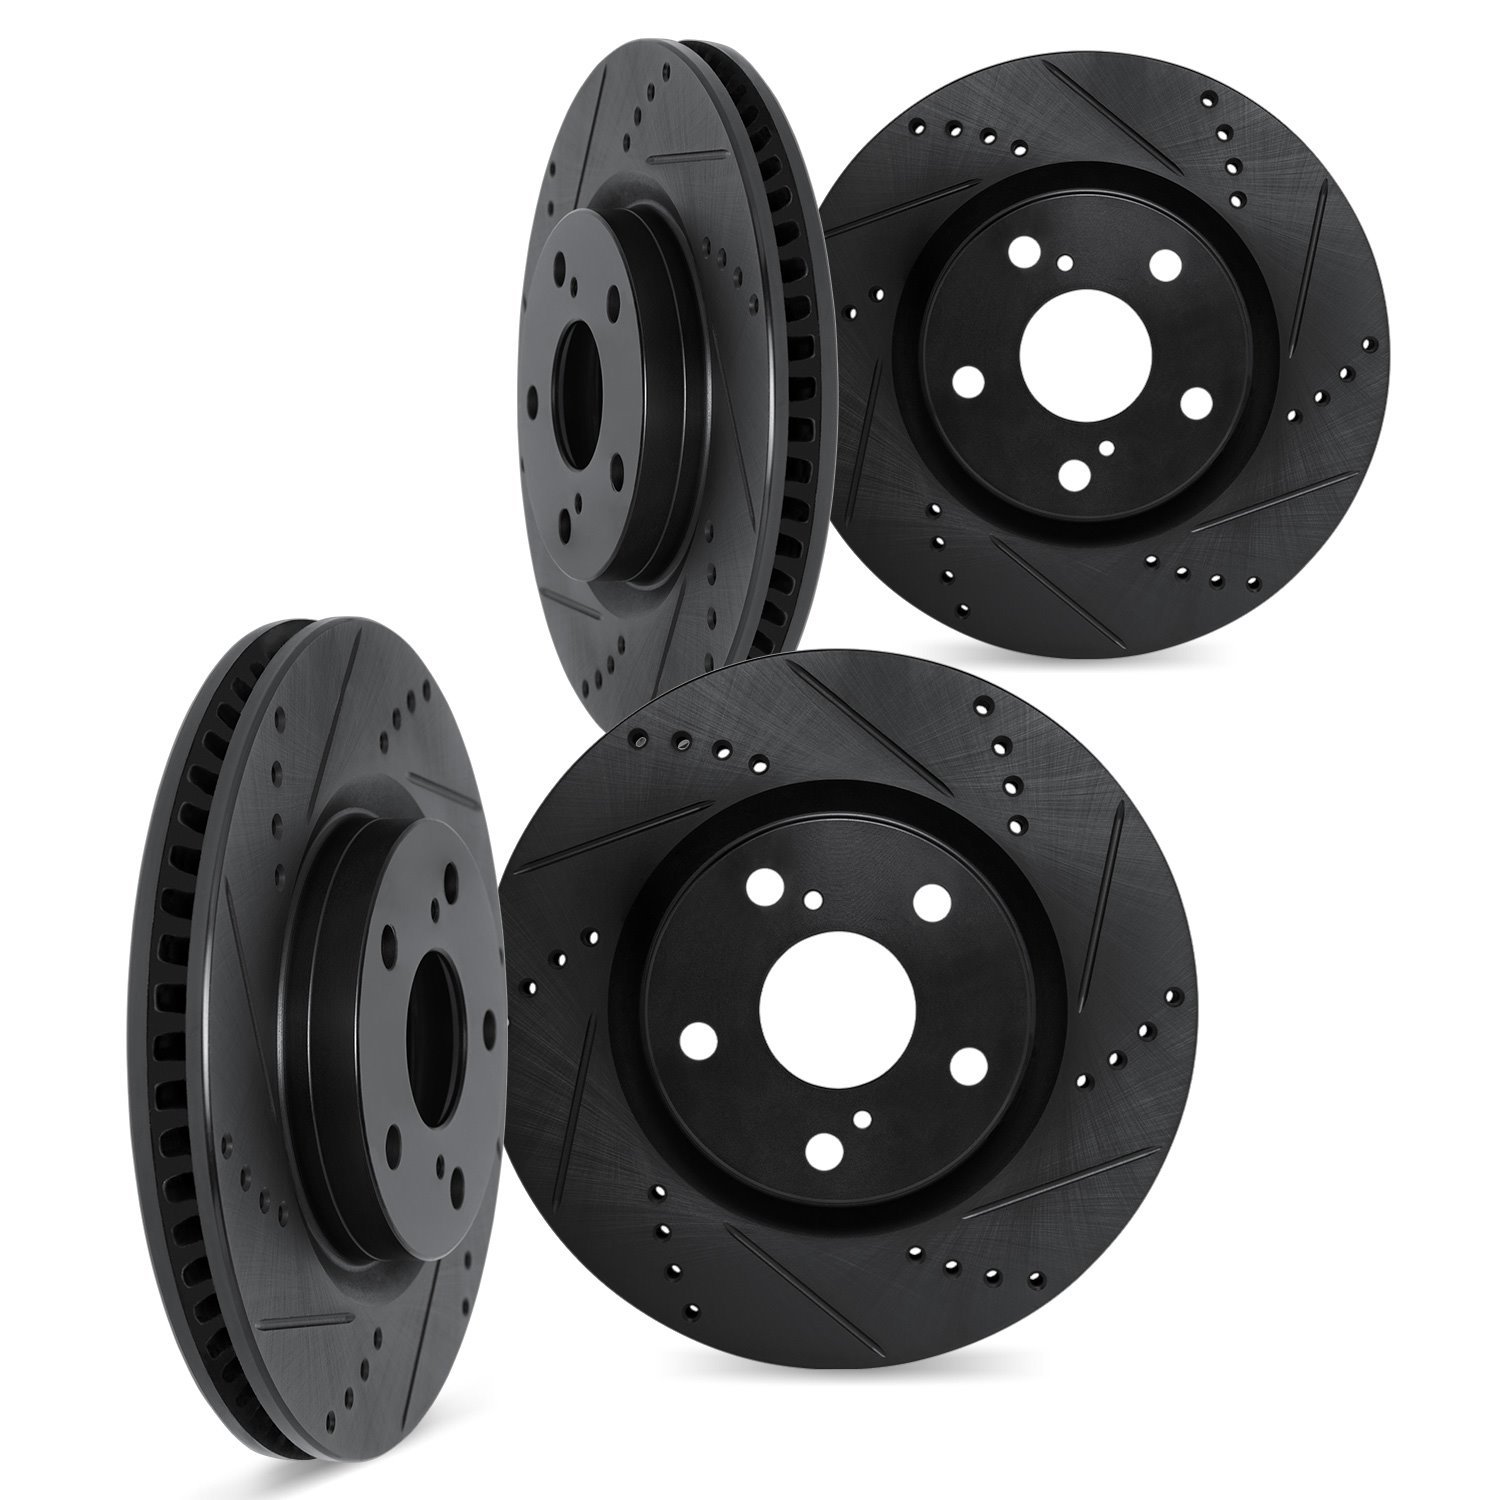 8004-26002 Drilled/Slotted Brake Rotors [Black], Fits Select Tesla, Position: Front and Rear